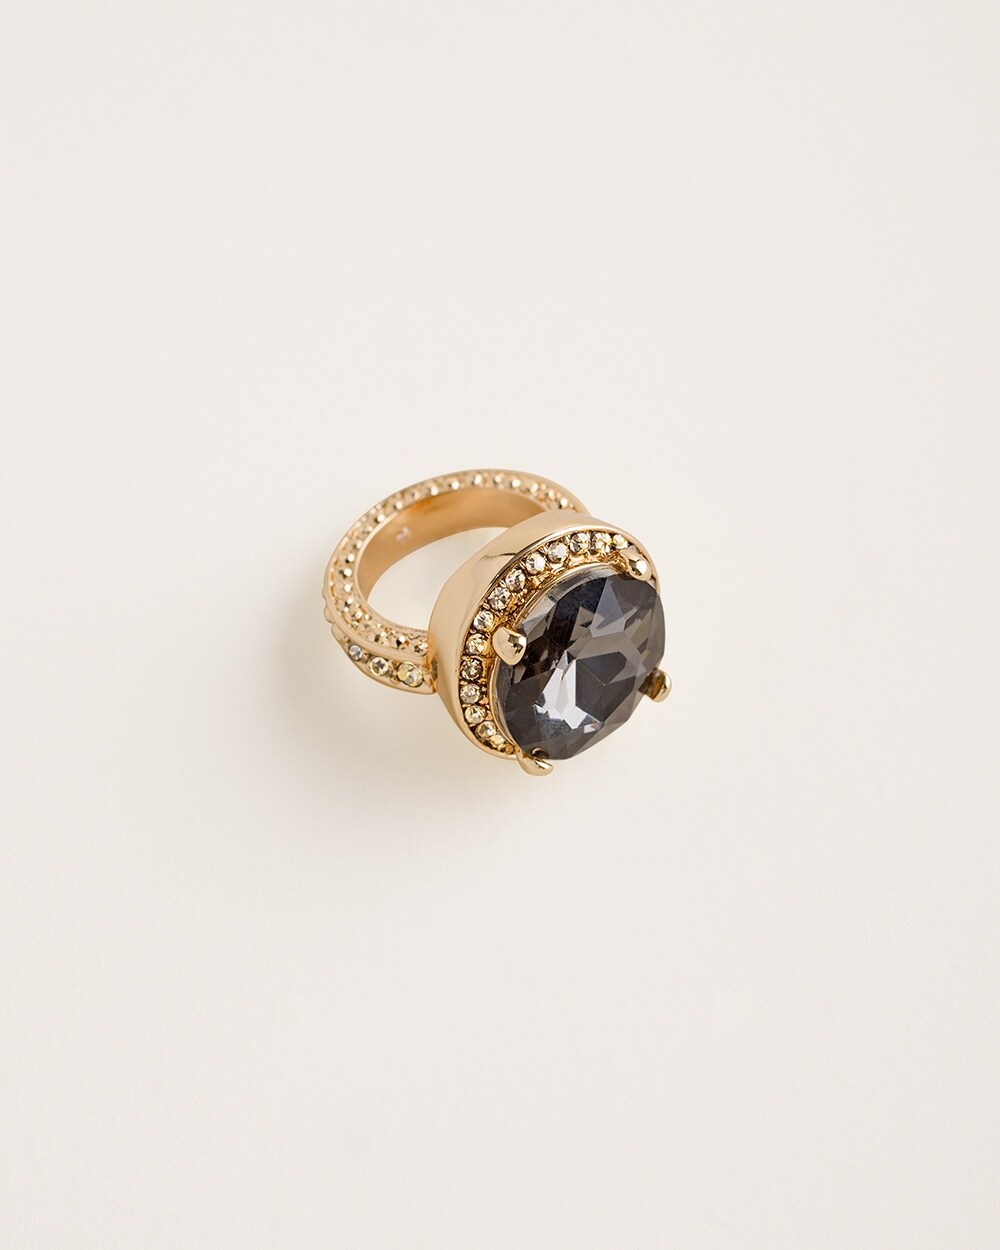 Goldtone Cocktail Ring with Black Stone